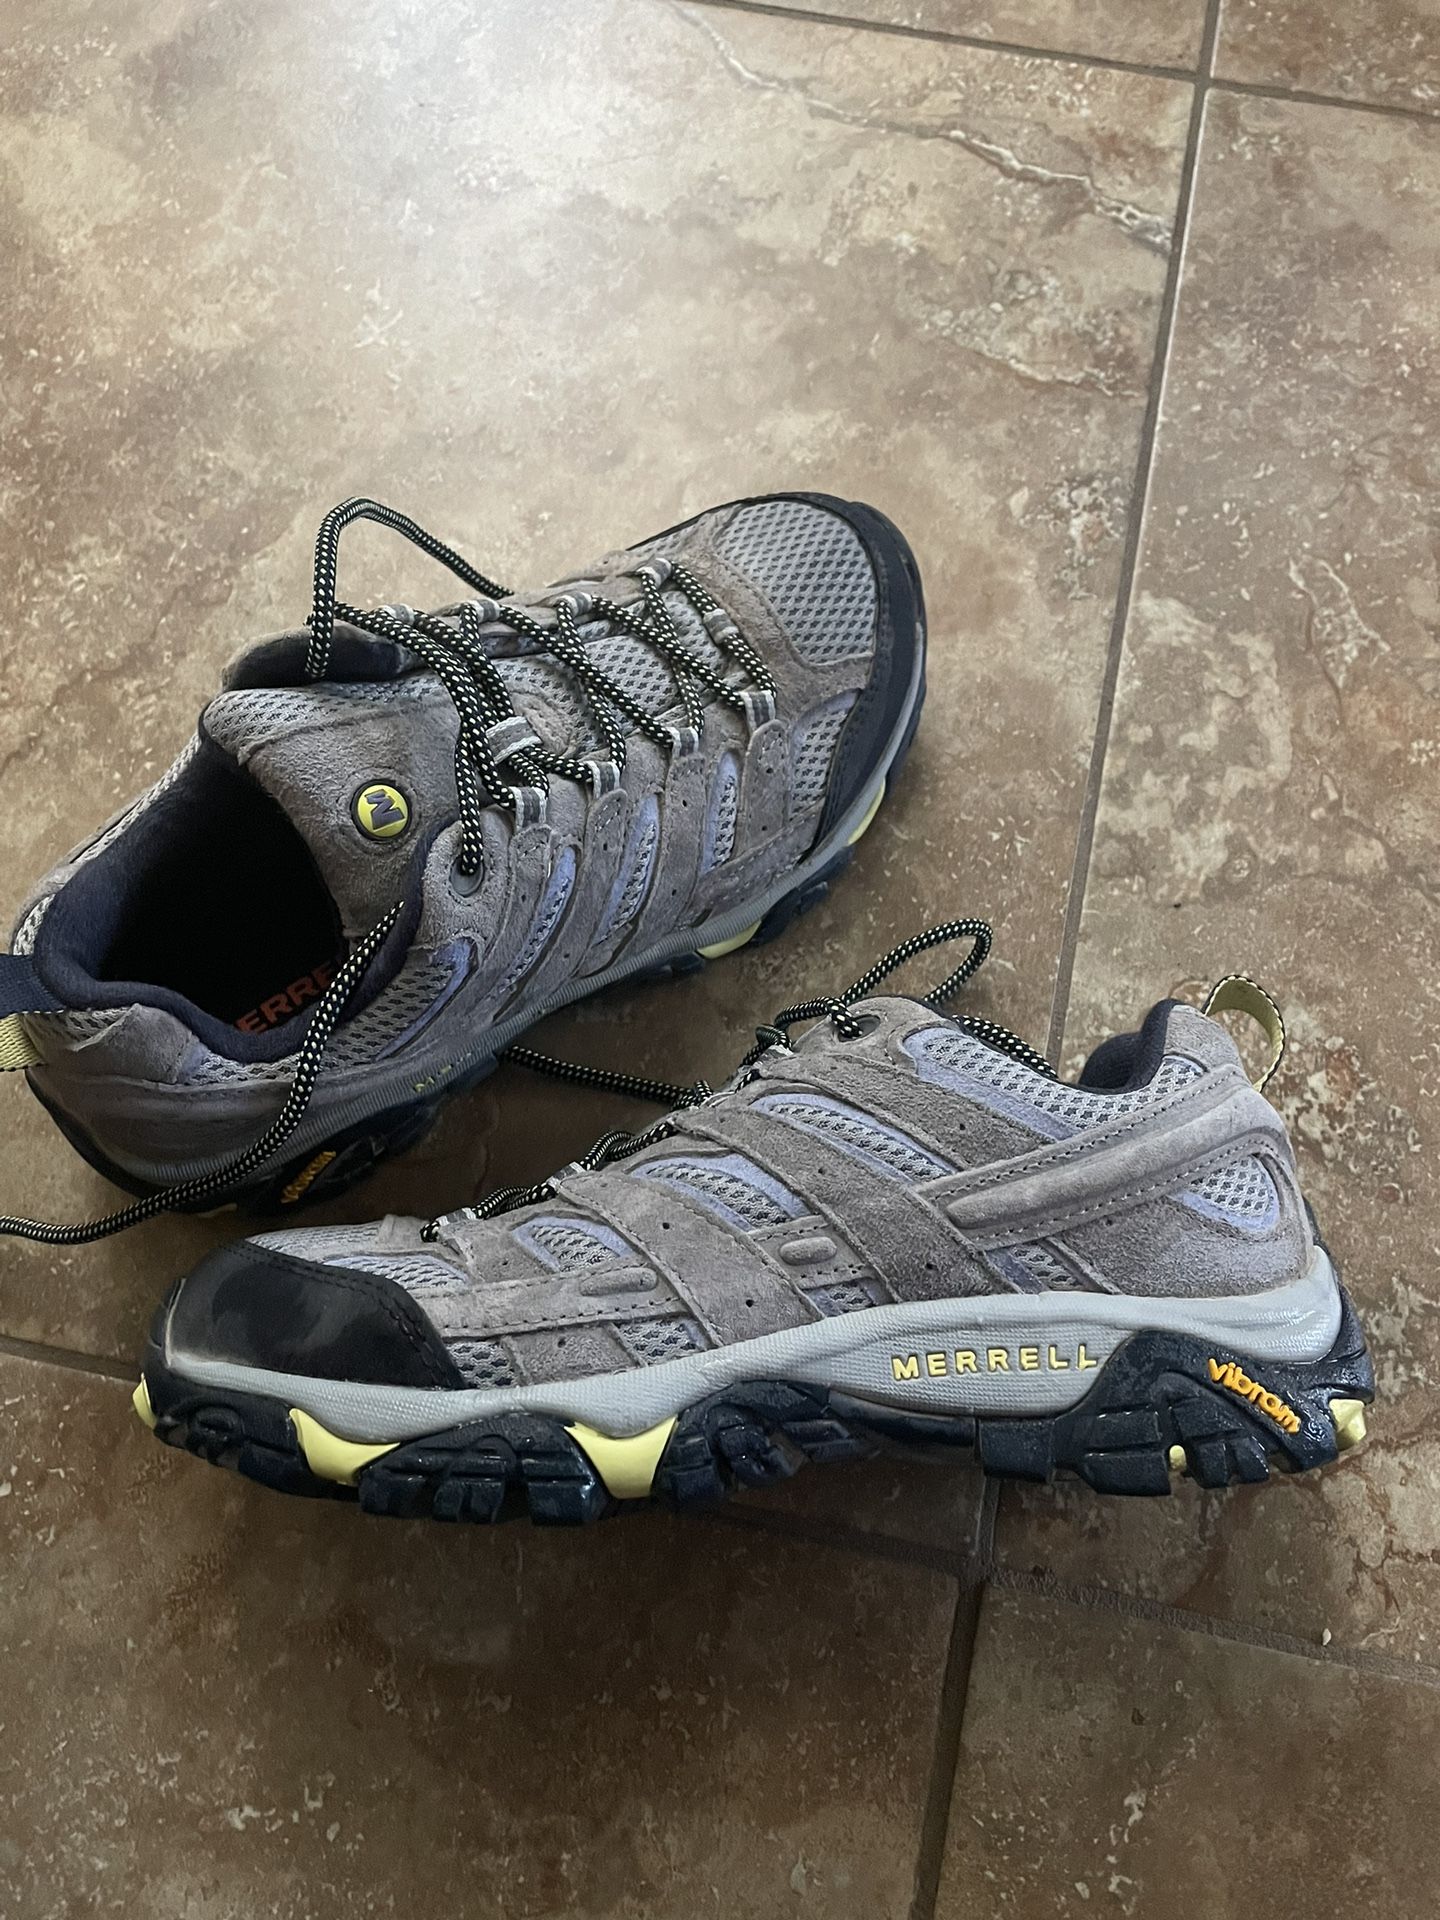 Merrell Hiking Shoes - women’s Size 8.5 for Sale in Las Vegas, NV - OfferUp